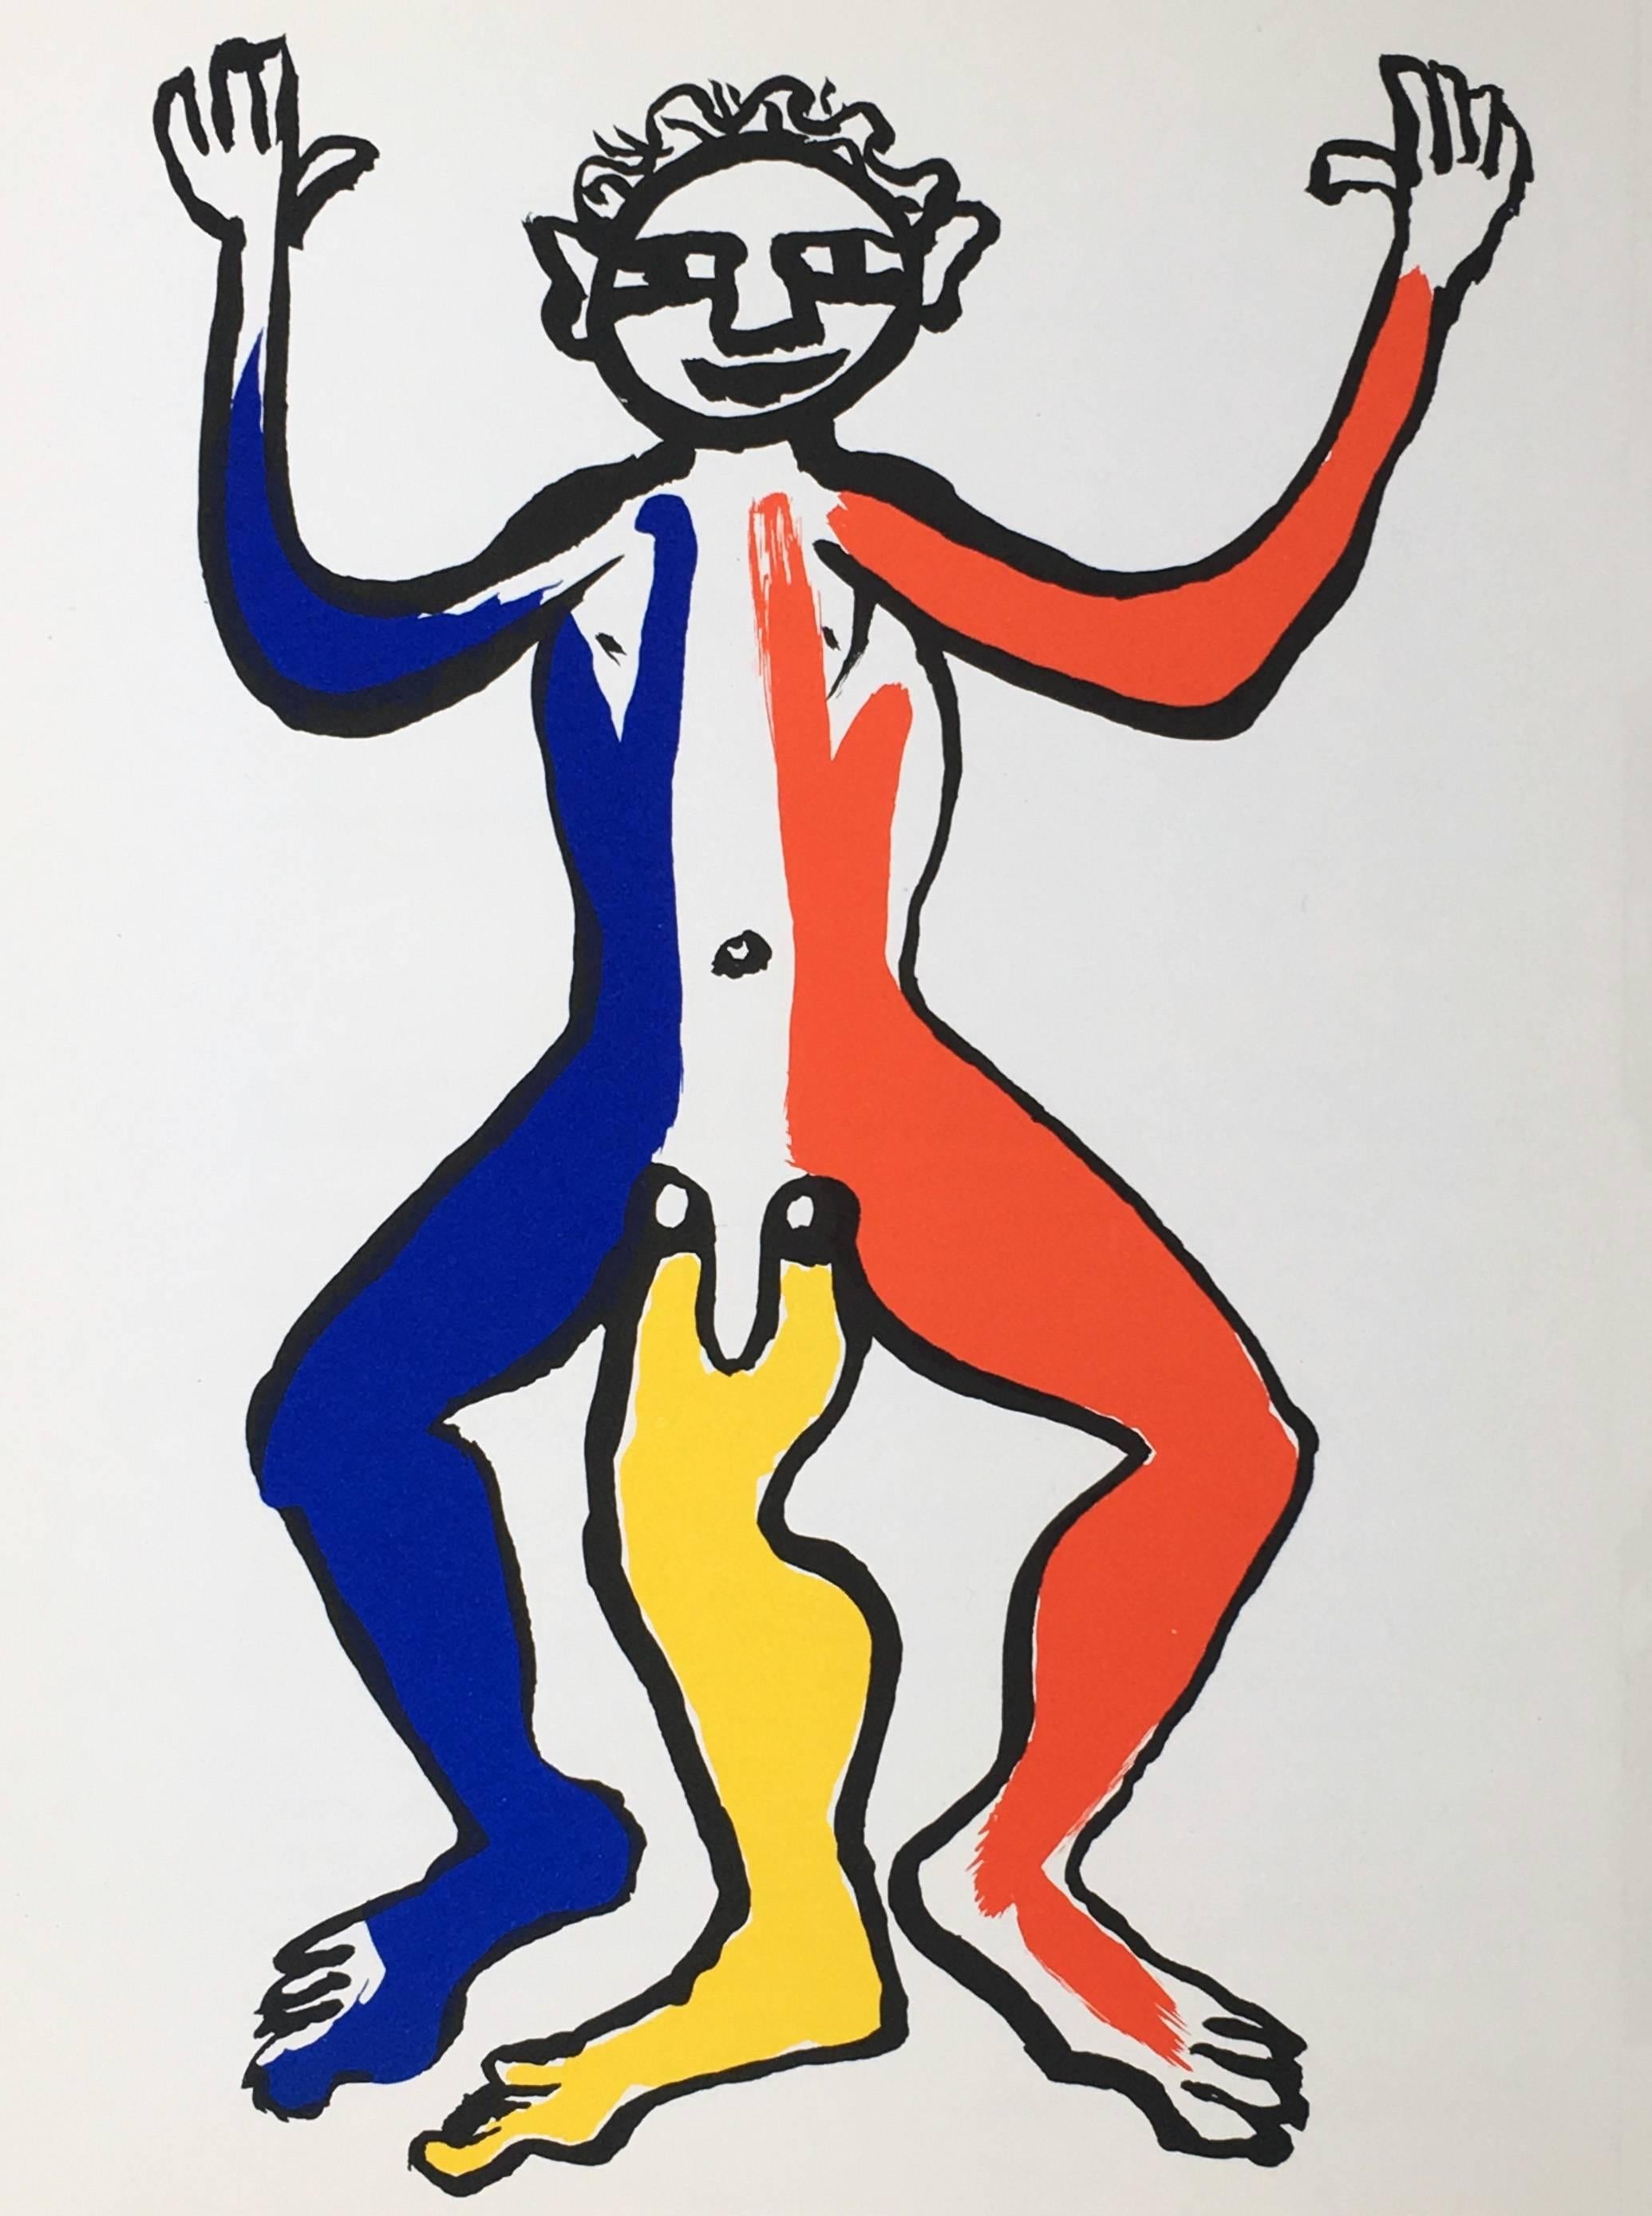 Vintage original Alexander Calder Lithograph 
Published by: Galerie Maeght, Paris, 1975
Portfolio: Derriere Le Miroir

Lithograph in colors
11 x 15 inches
Very good condition 
Unsigned from an edition of unknown 

Related Categories
Calder prints.